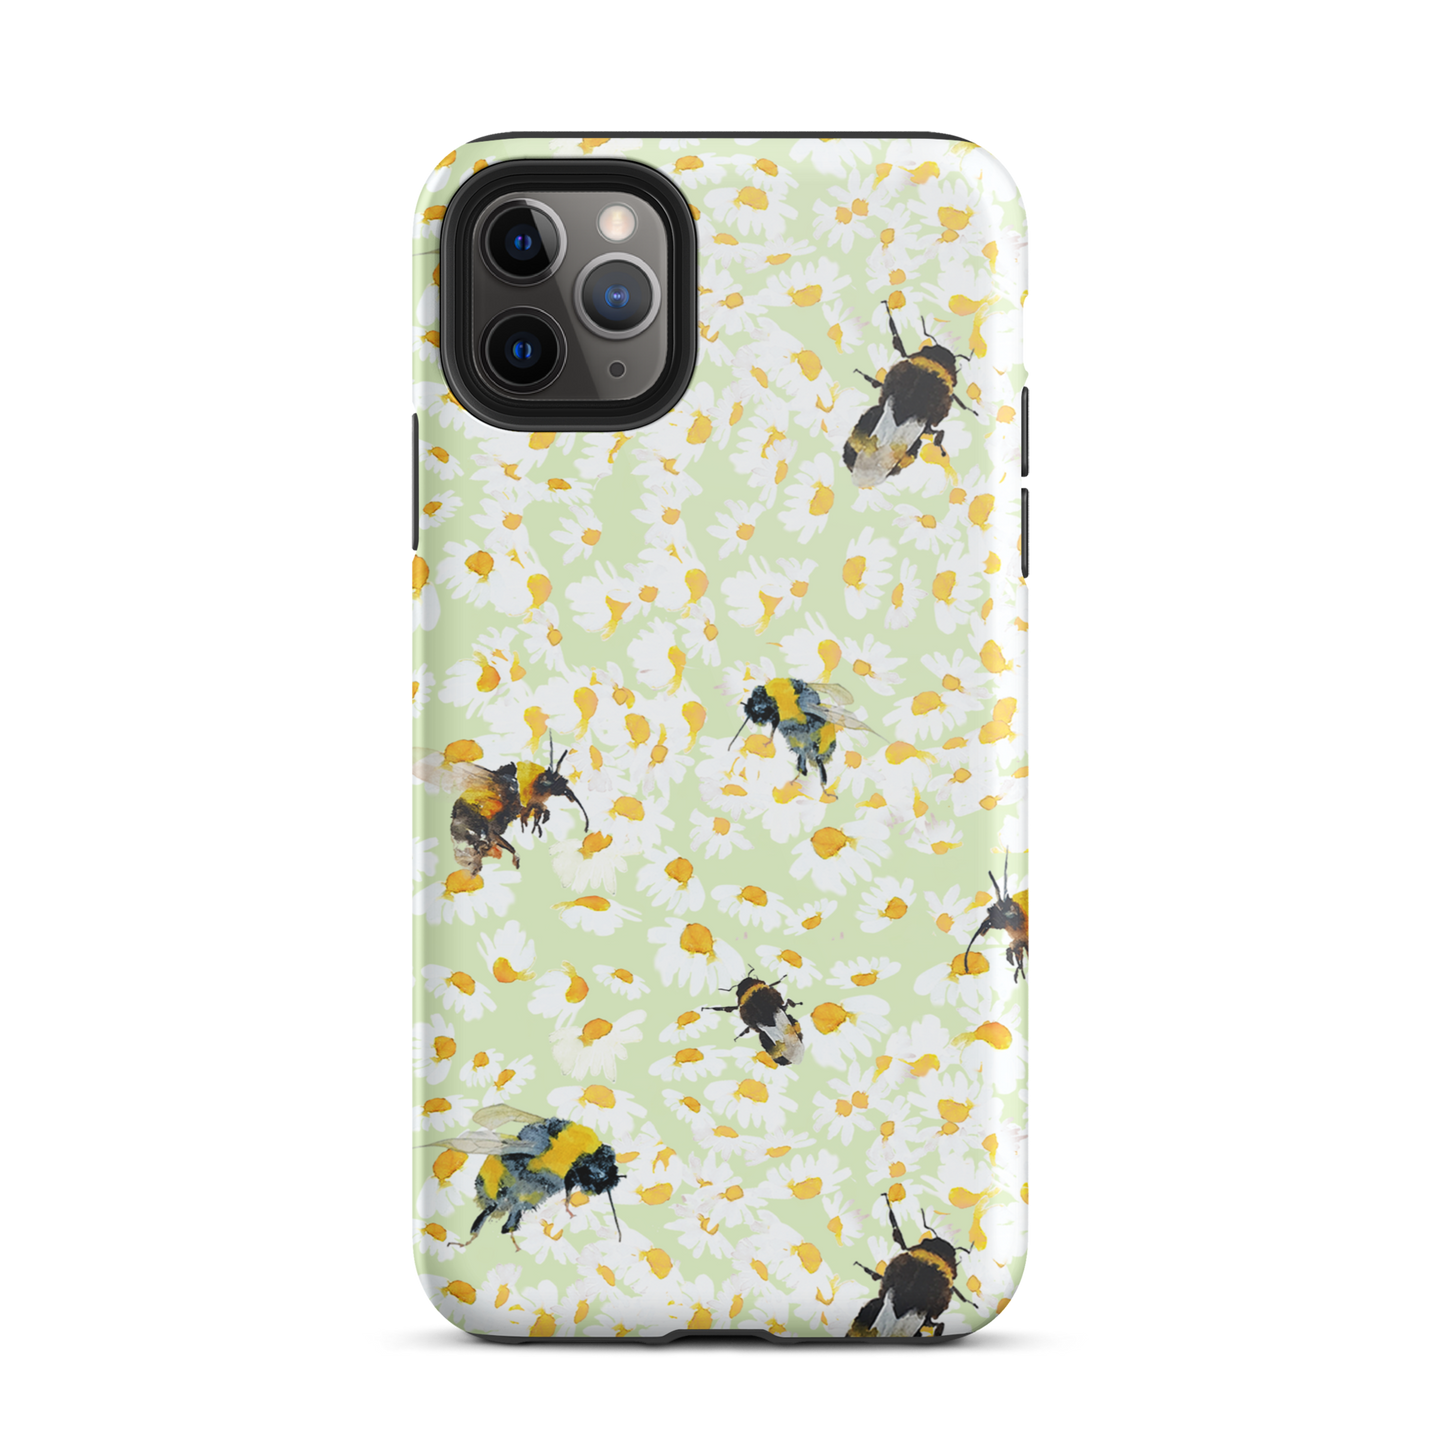 iPhone Annie Grant Bee and Daisies Mobile Phone Tough Case